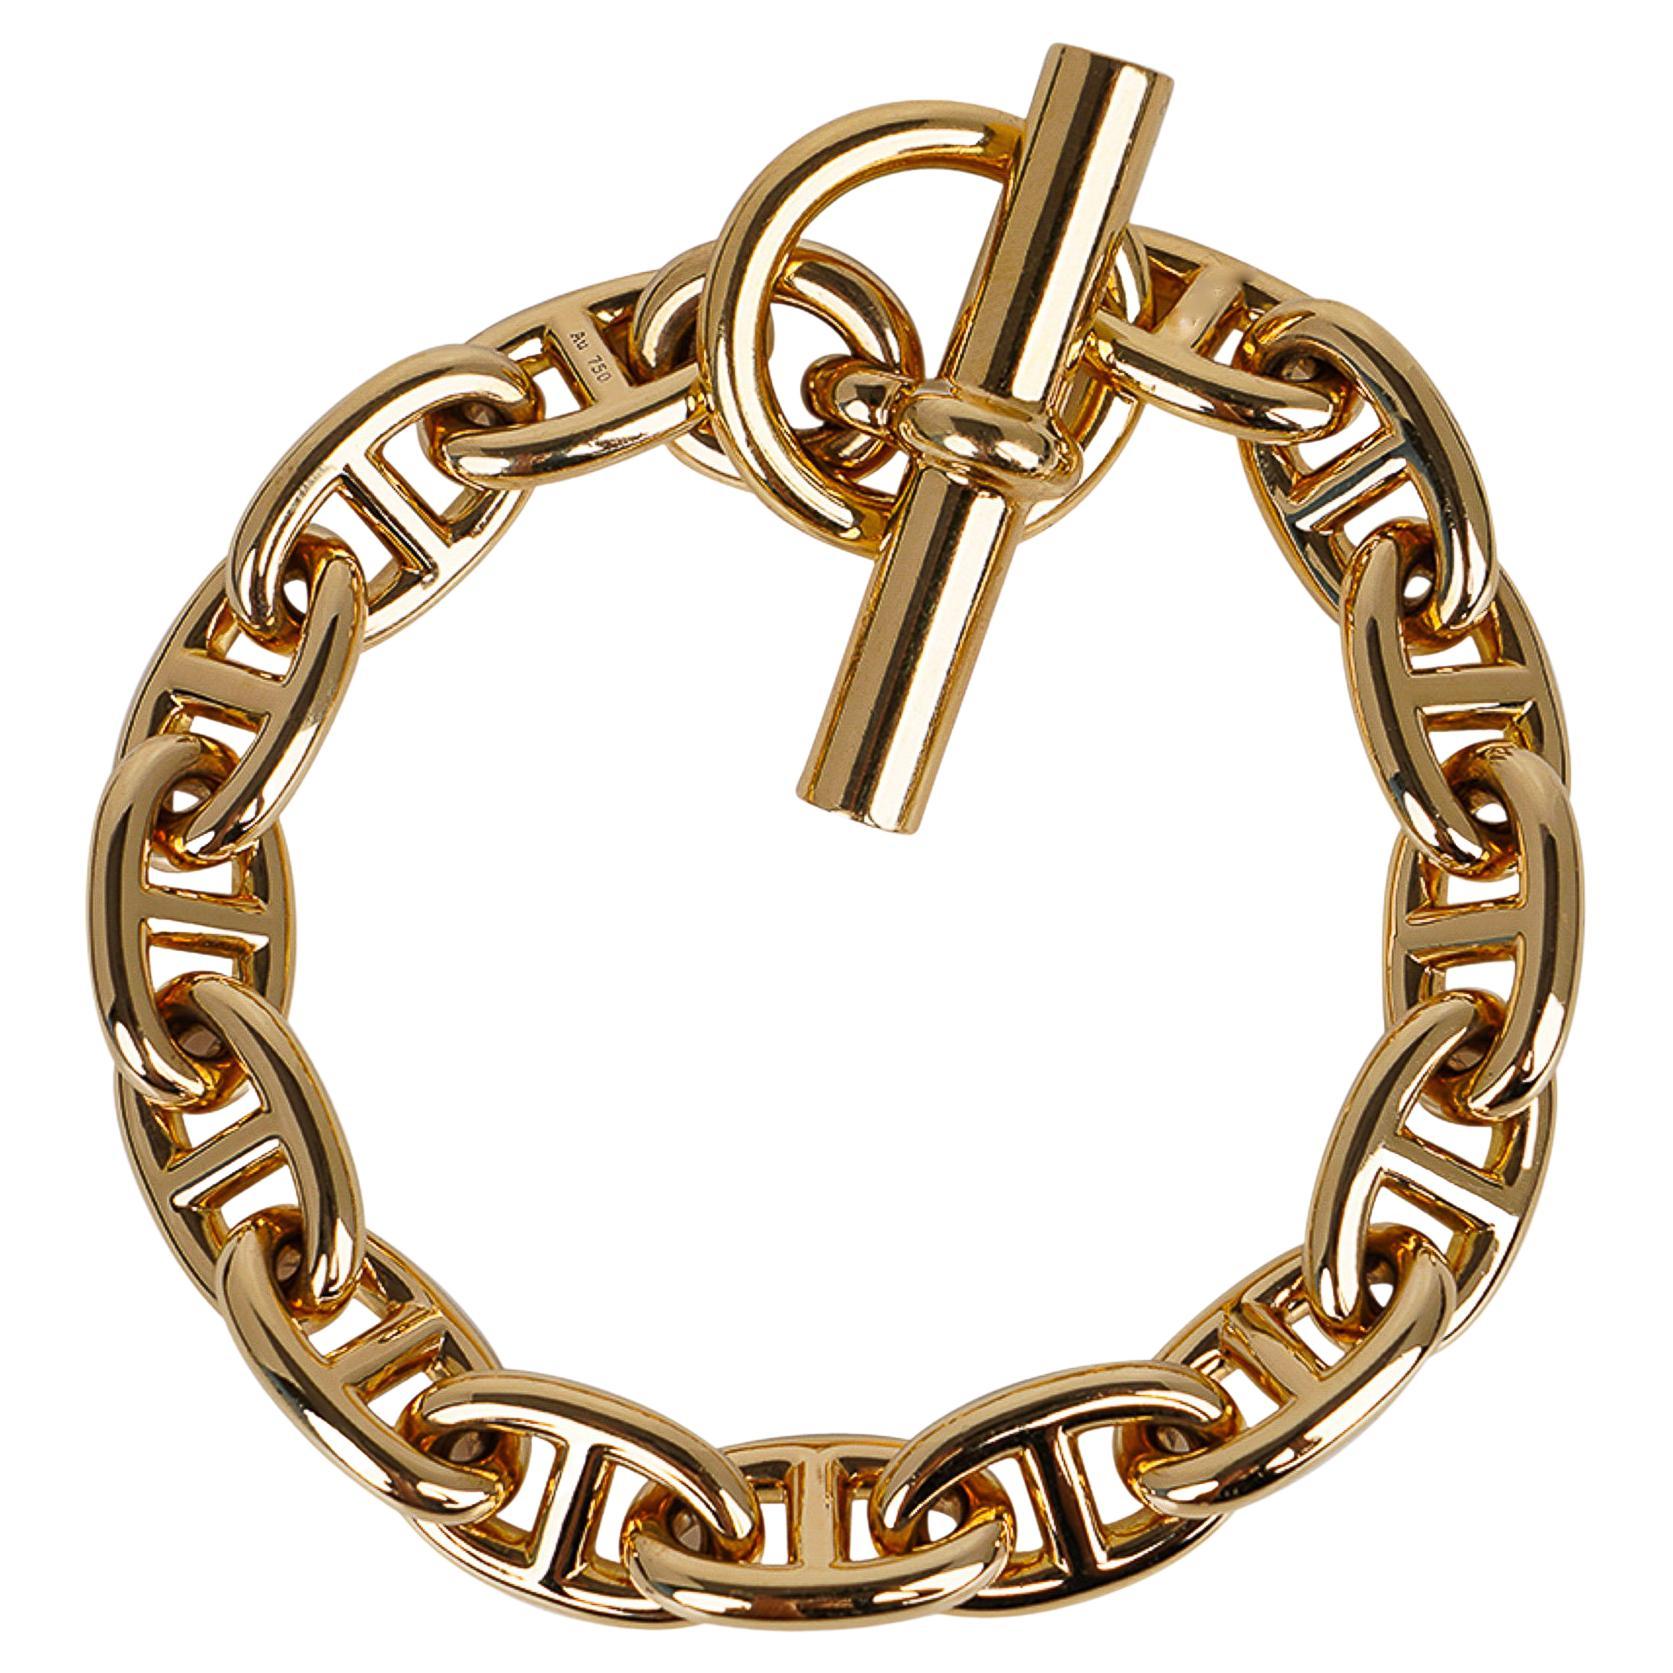 Mightychic offers an Hermes Chaine d'Ancre MM Bracelet featured in 18k Yellow Gold.
No longer produced in yellow gold, this beauty is a great find for an avid Hermes collector!
Toggle closure.
The nautical Chaine d'Ancre was designed as jewelry over